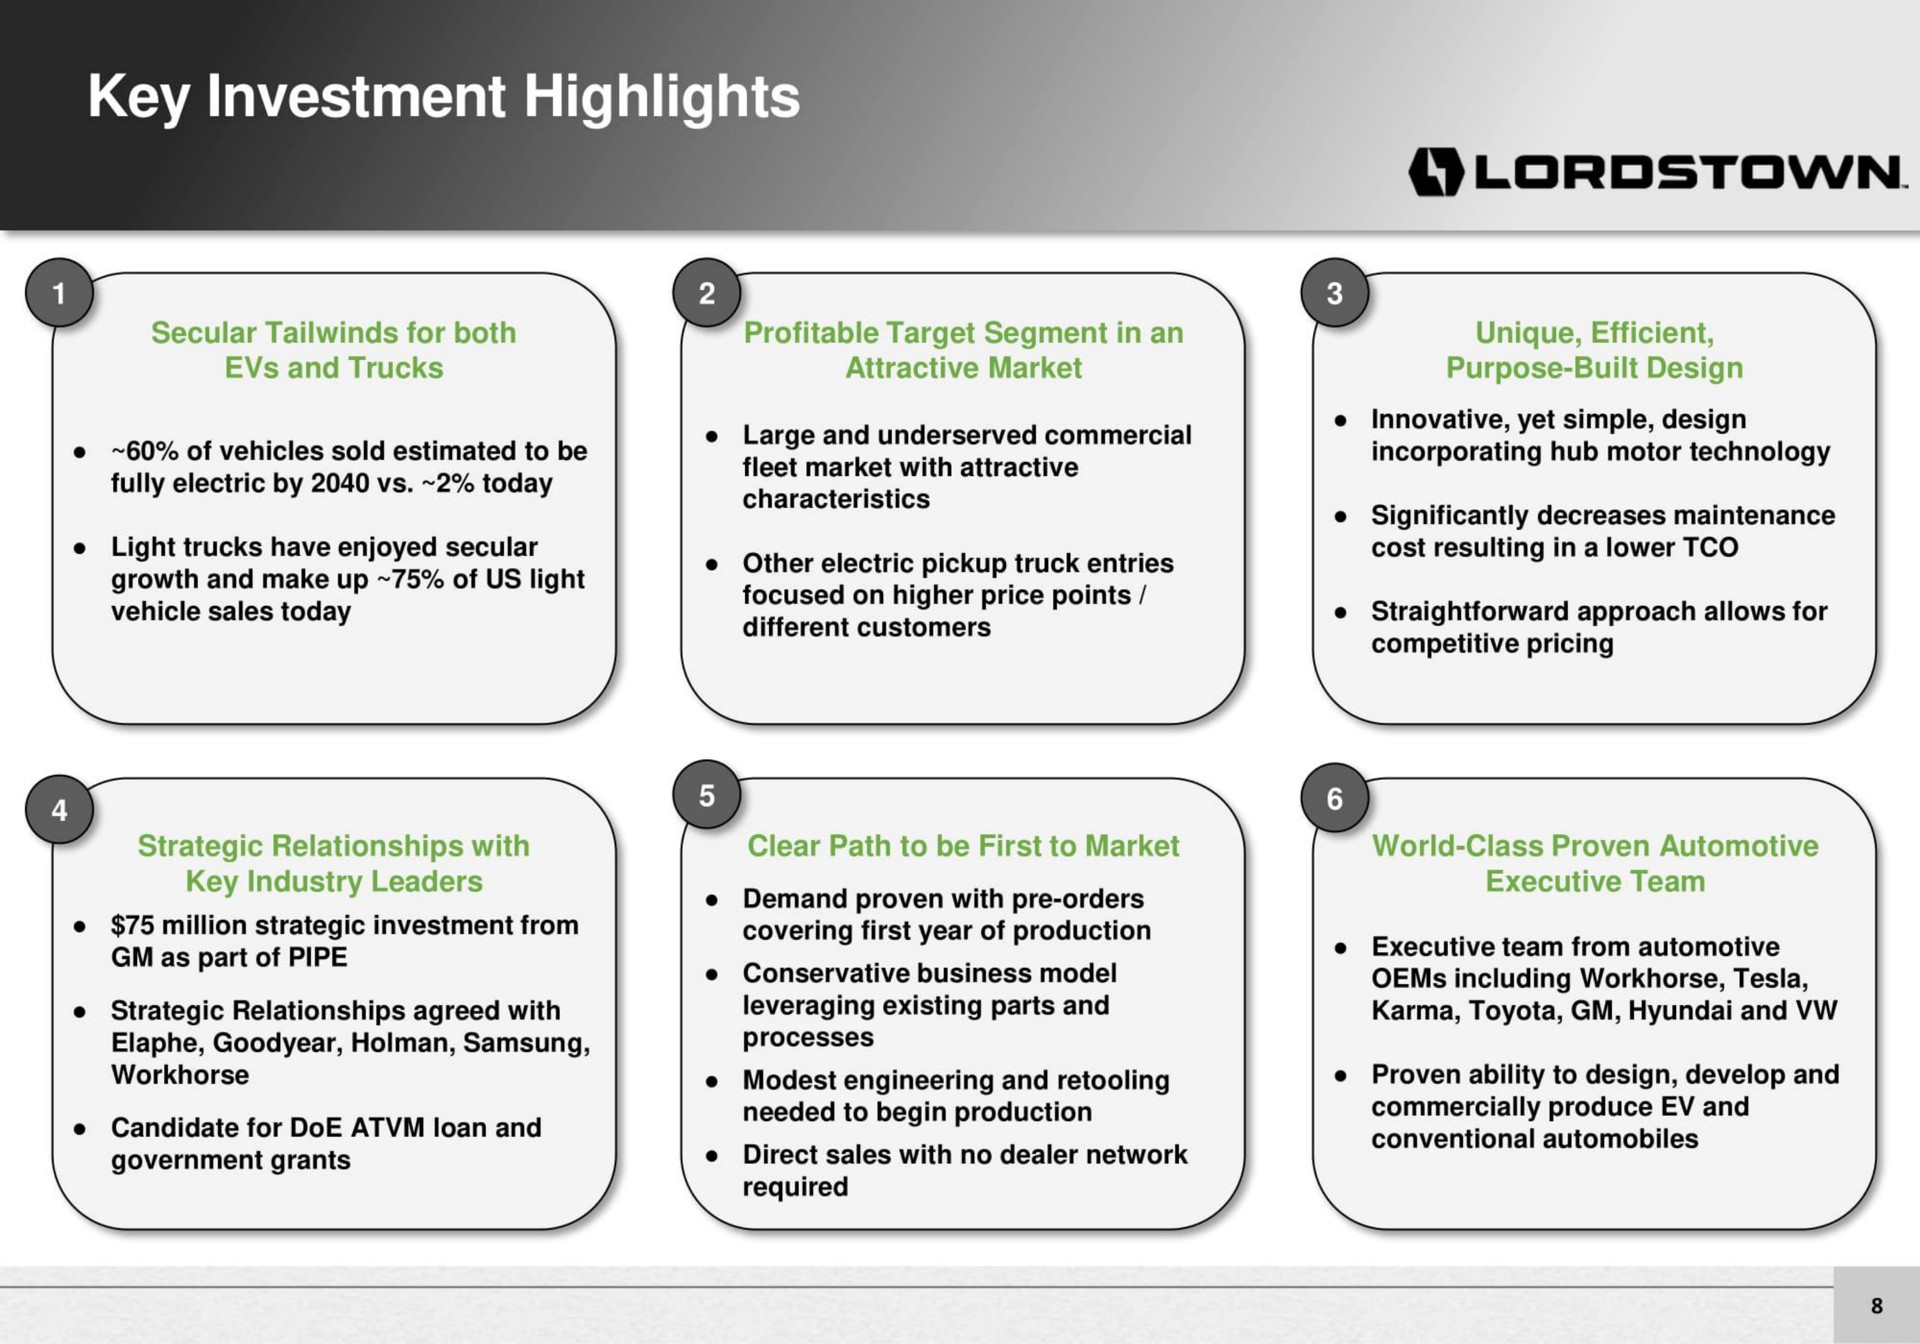 key investment highlights | Lordstown Motors